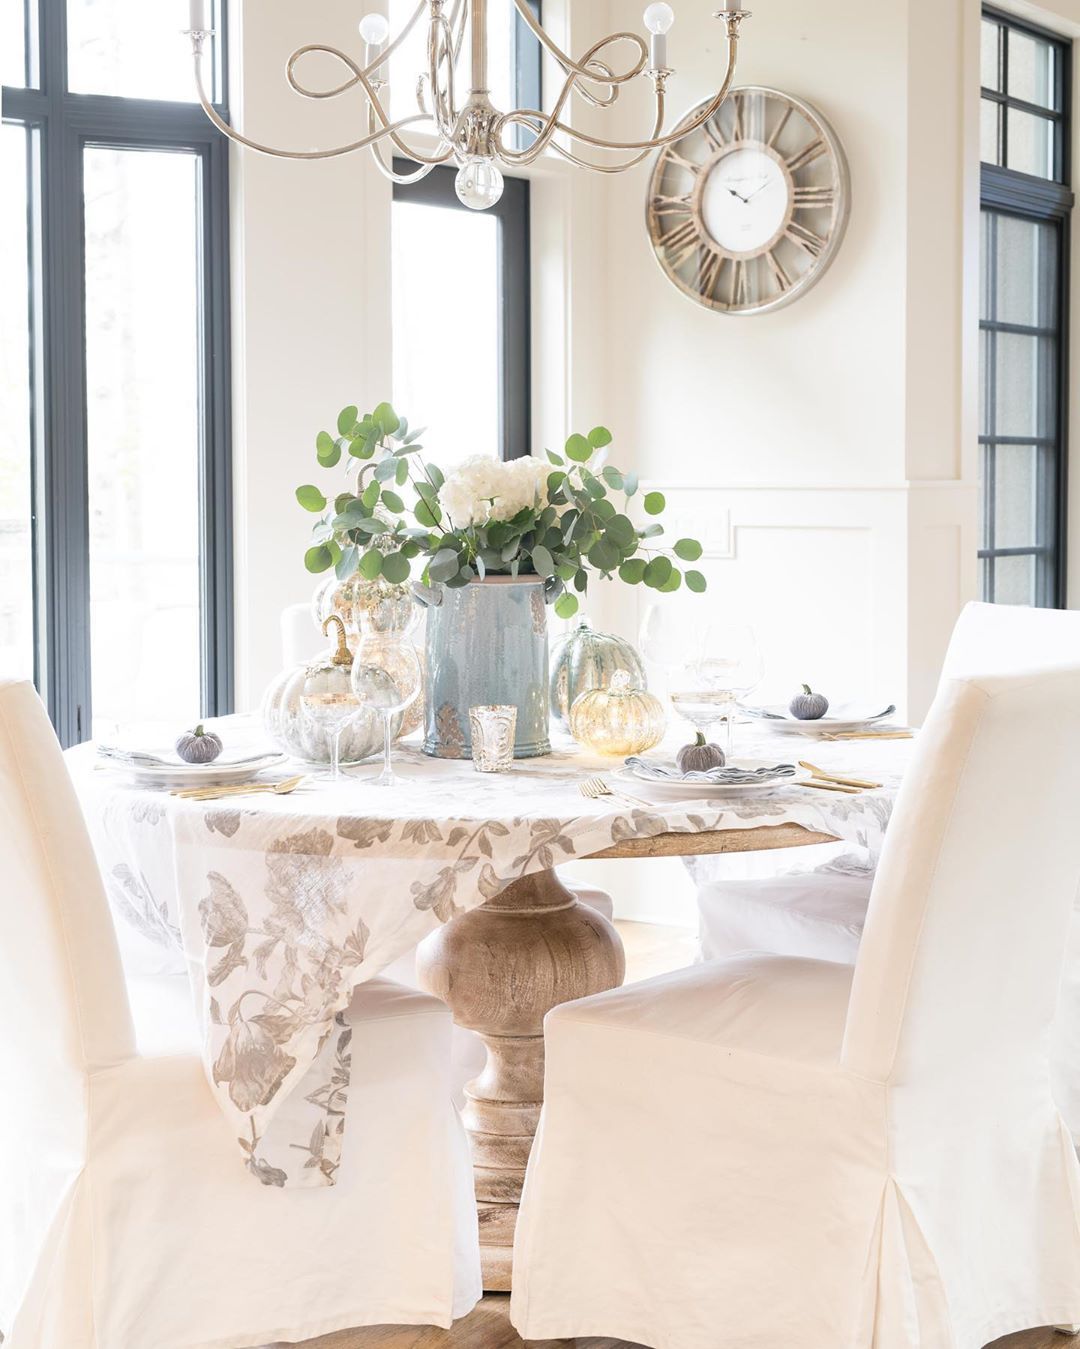 White Slipcovered Chairs in French Country Breakfast Nook via @decoratinglife.ca